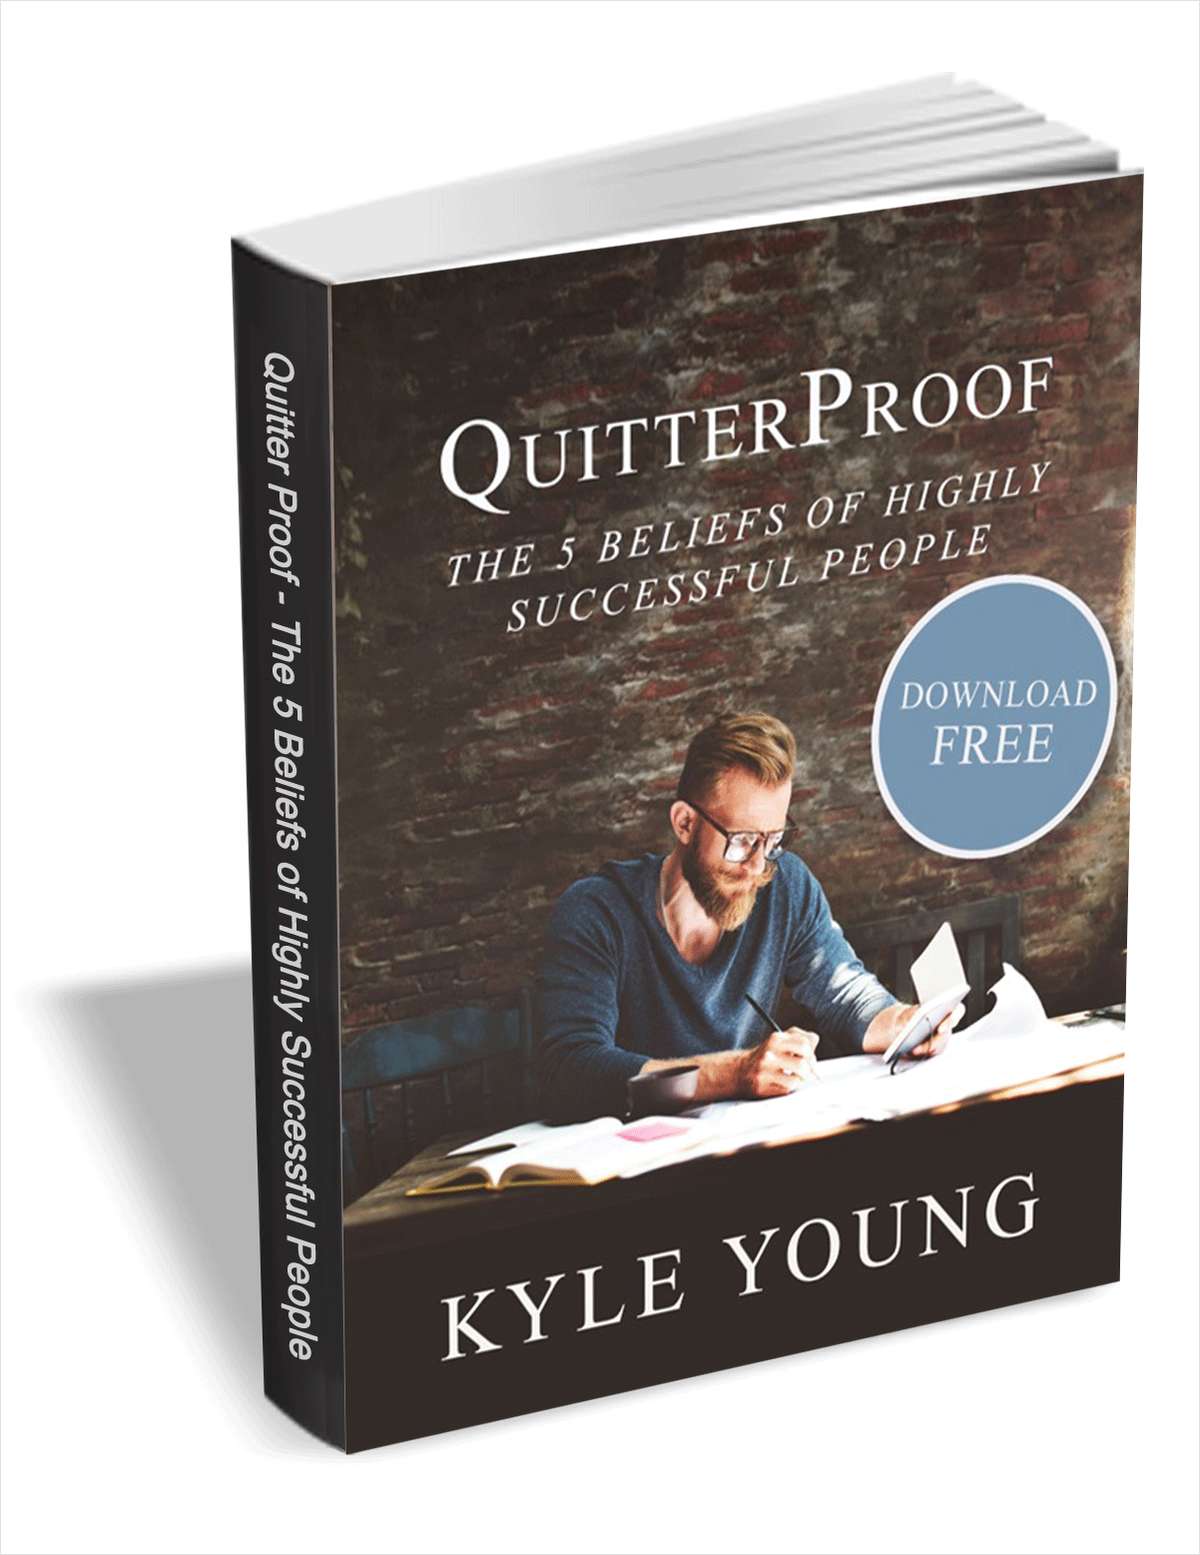 QuitterProof - The 5 Beliefs of Highly Successful People.